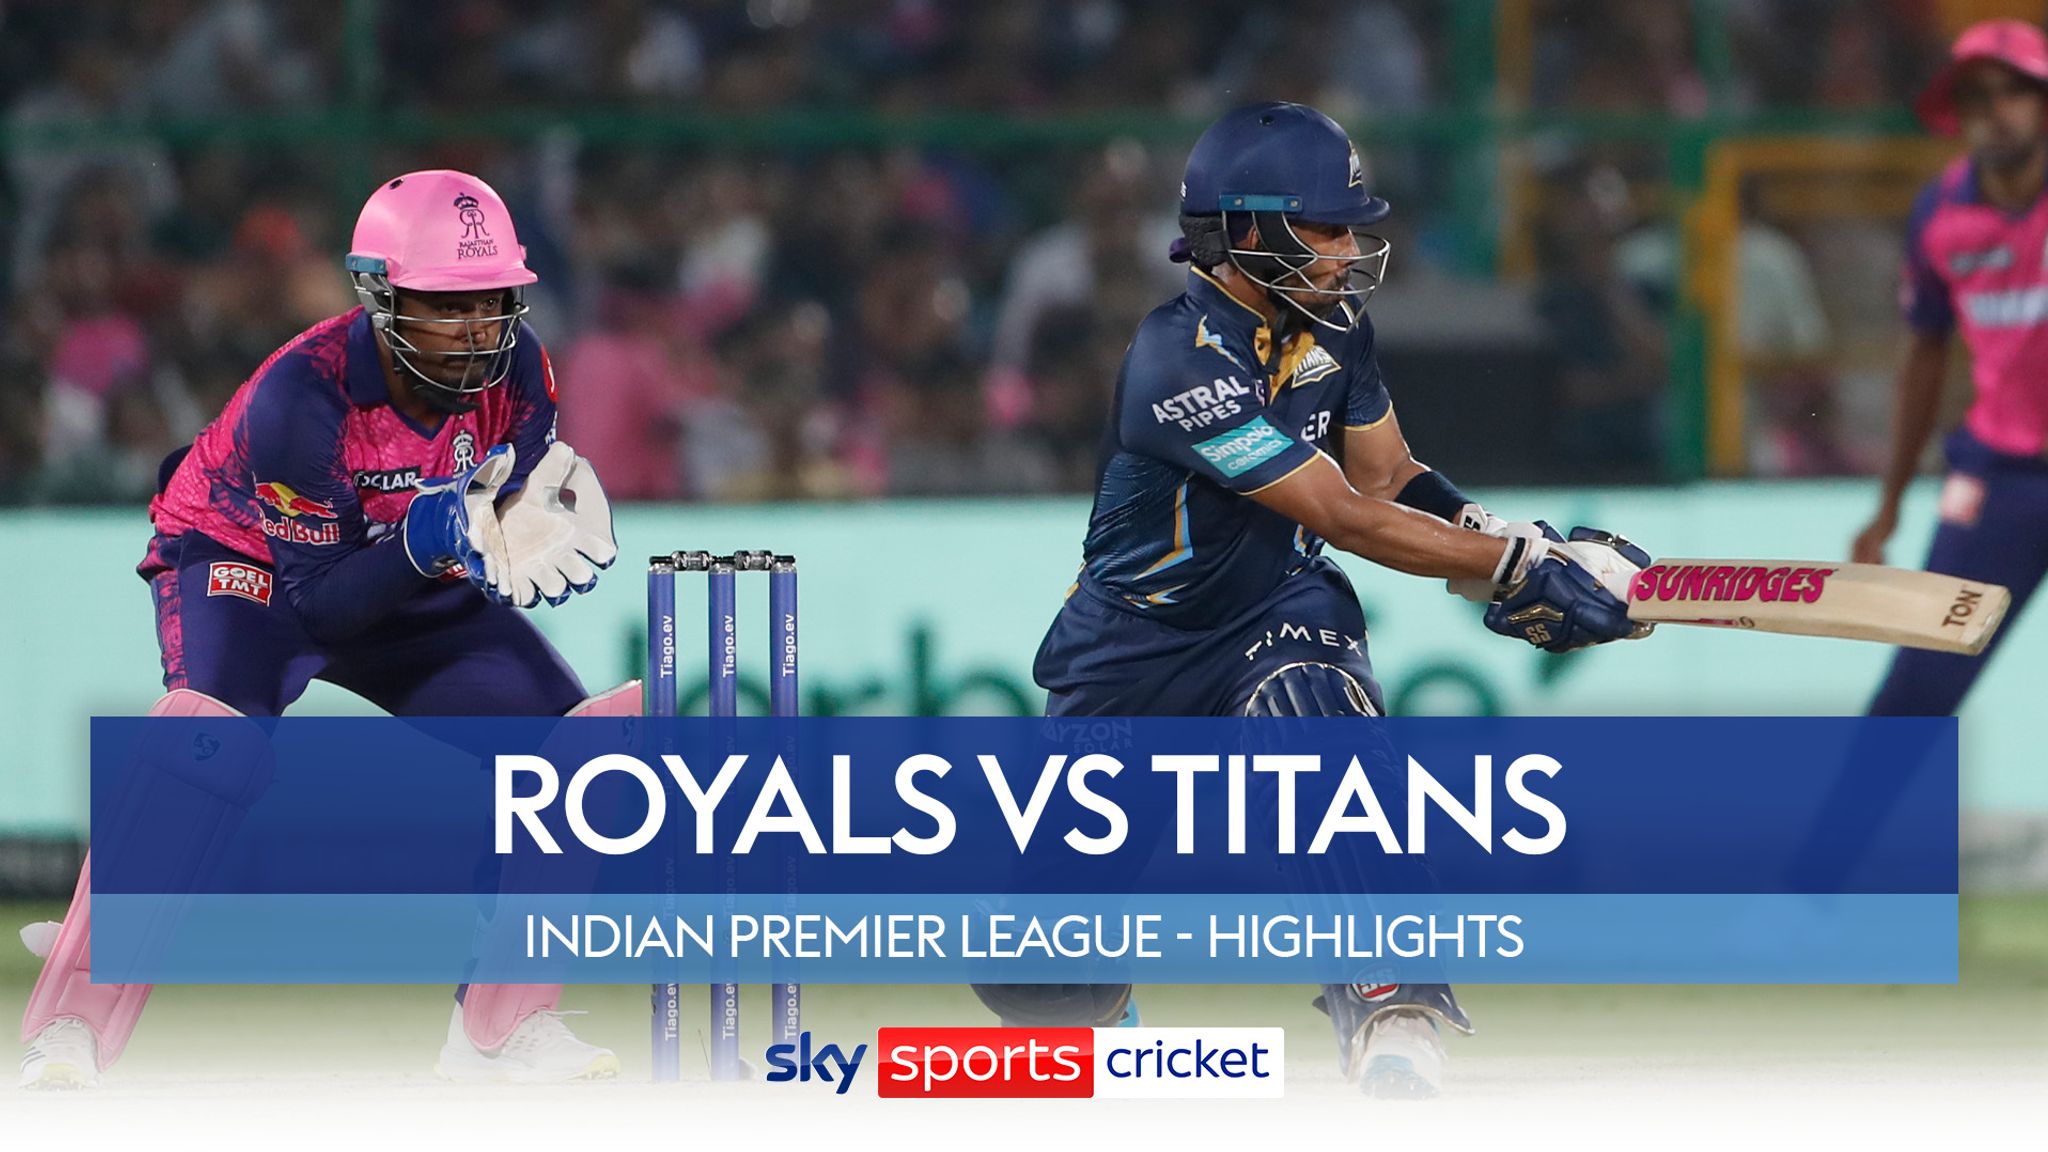 Gujarat Titans thrash Rajasthan Royals to strengthen play-off hopes IPL highlights Video Watch TV Show Sky Sports